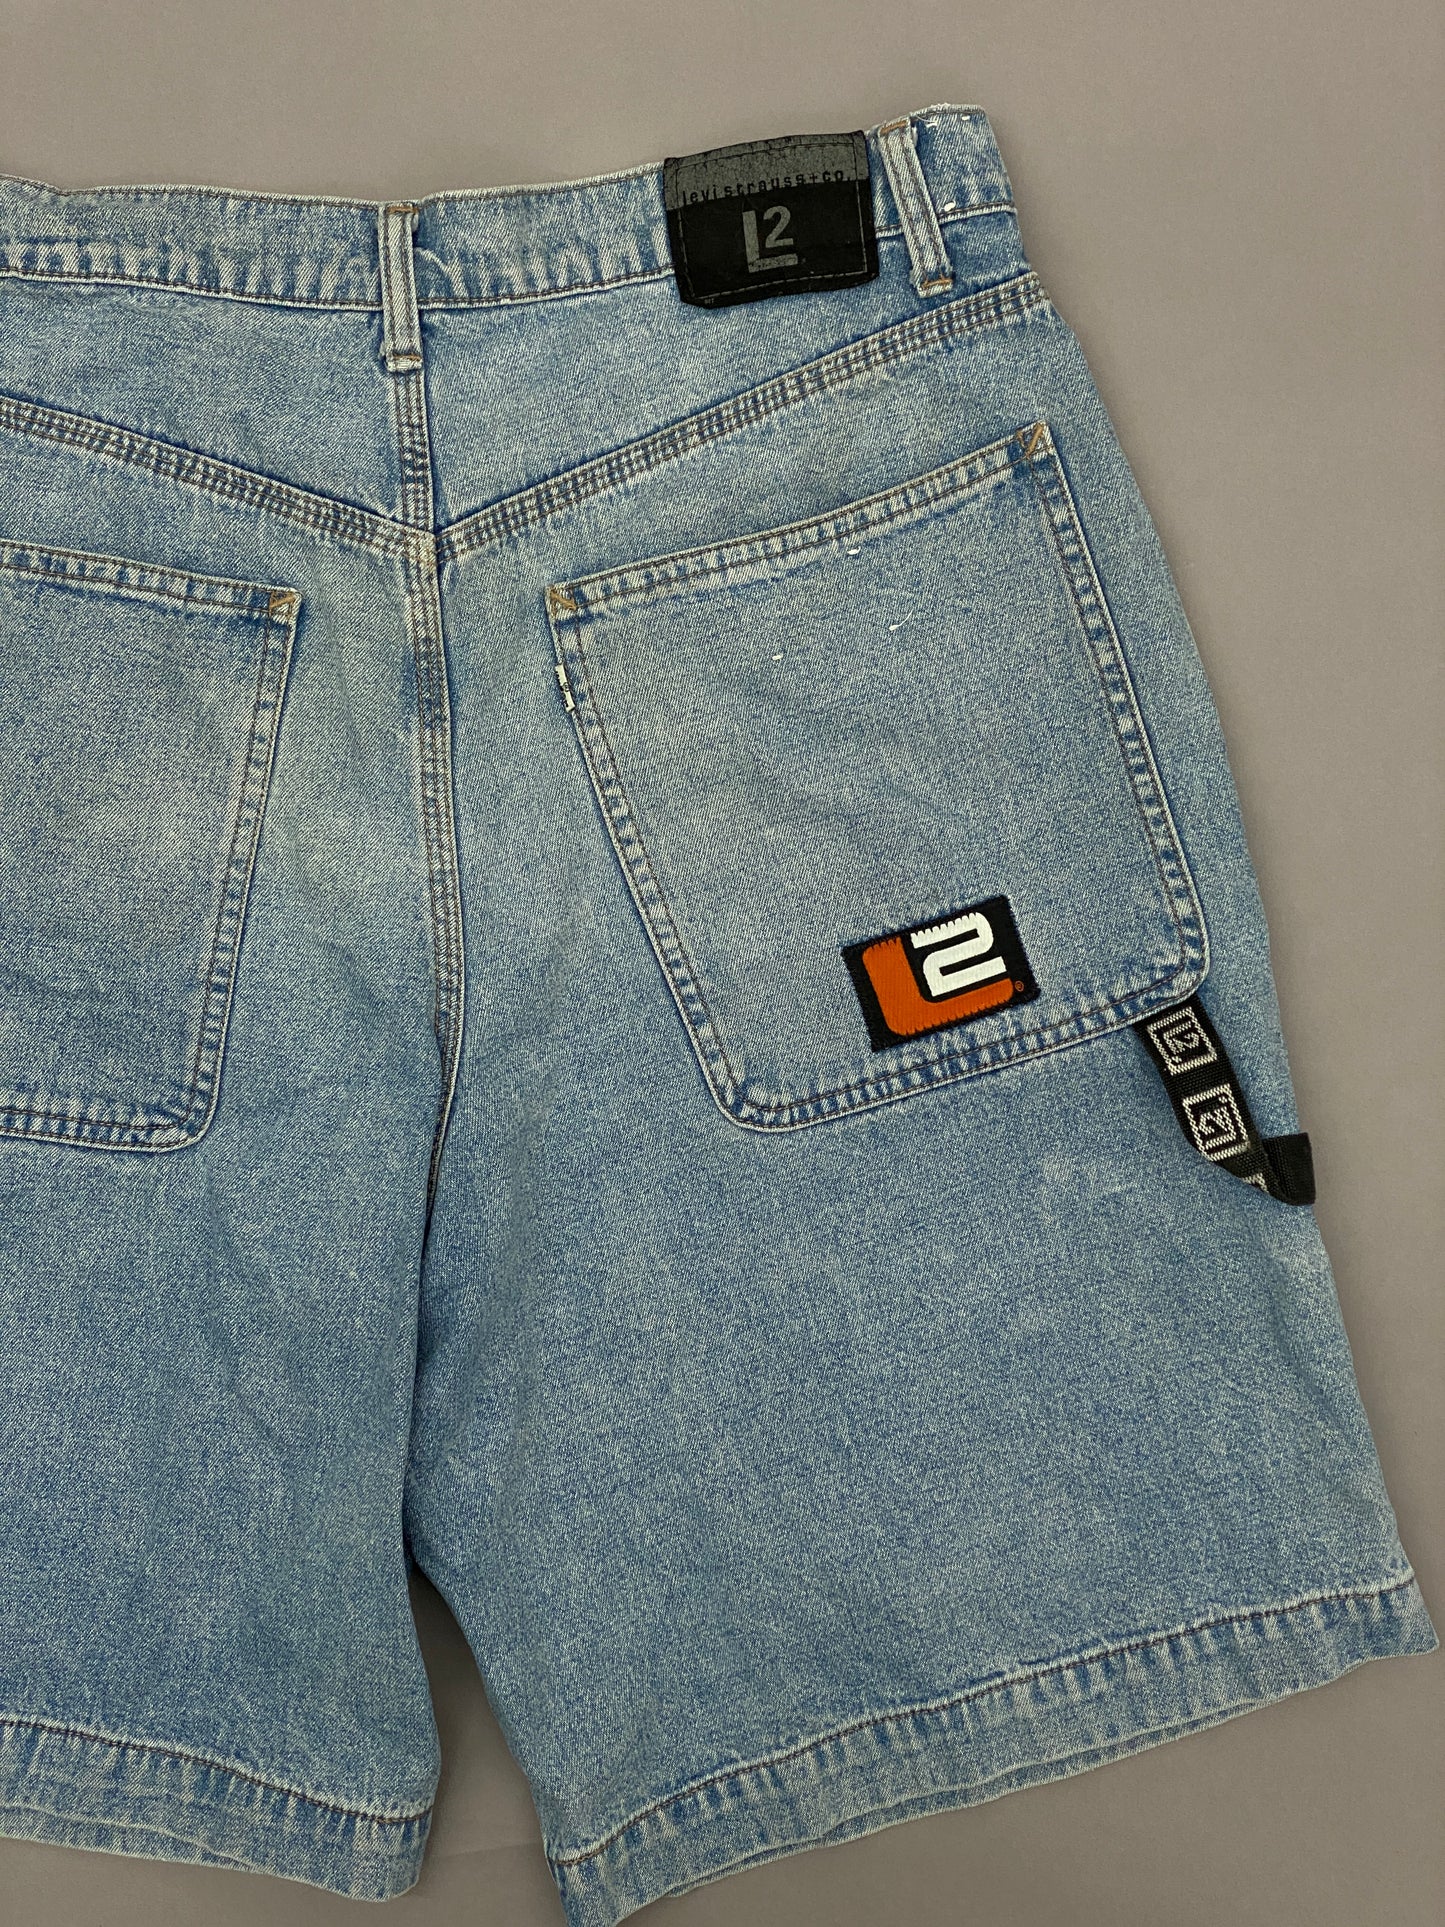 Levis Silver Tab Vintage Baggy Shorts - 32